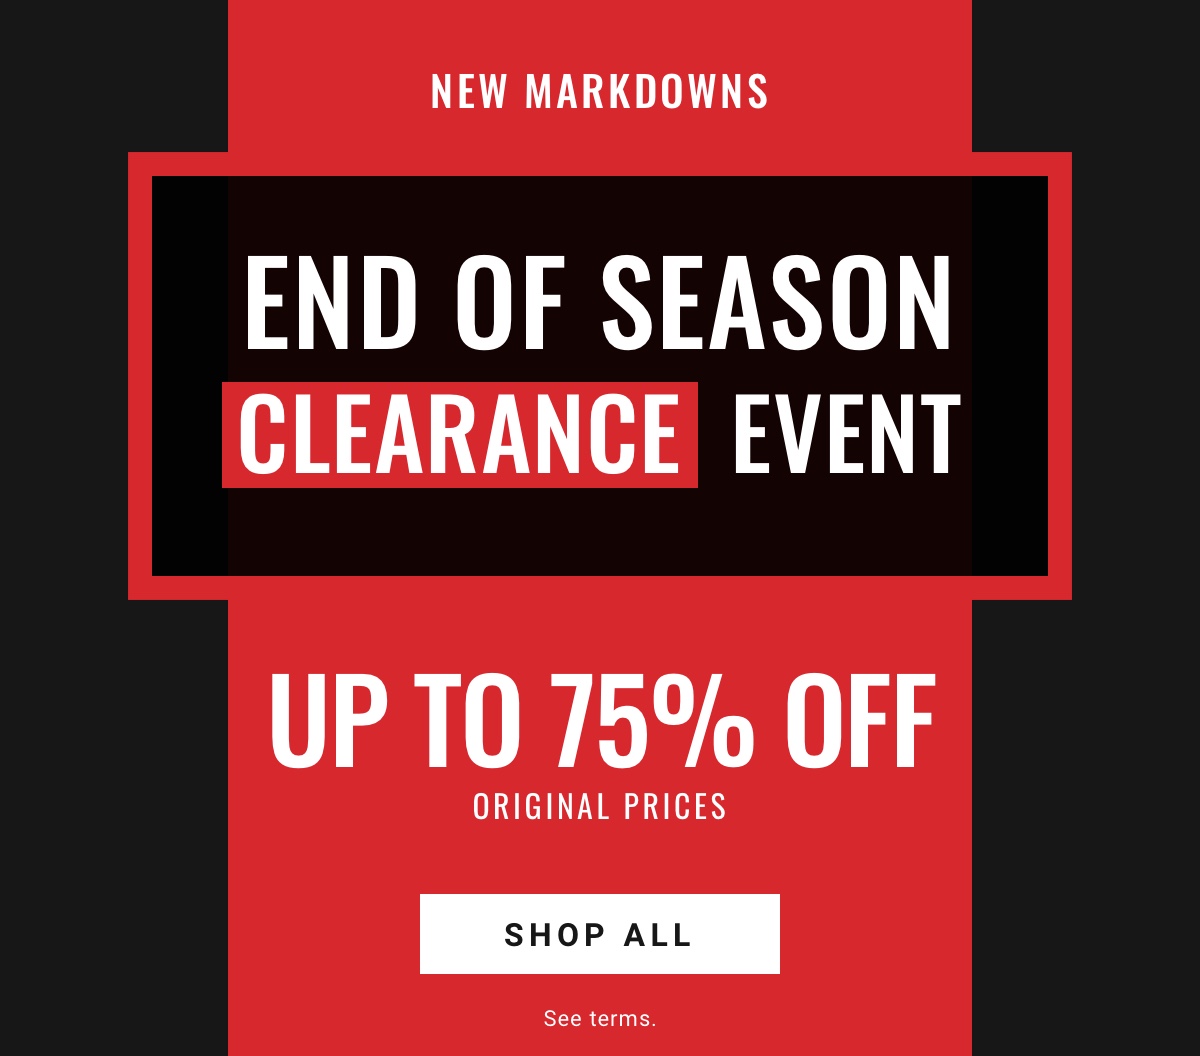 New Markdowns | End Of Season Clearance Event | Up to 75% Off Original Prices - Shop All